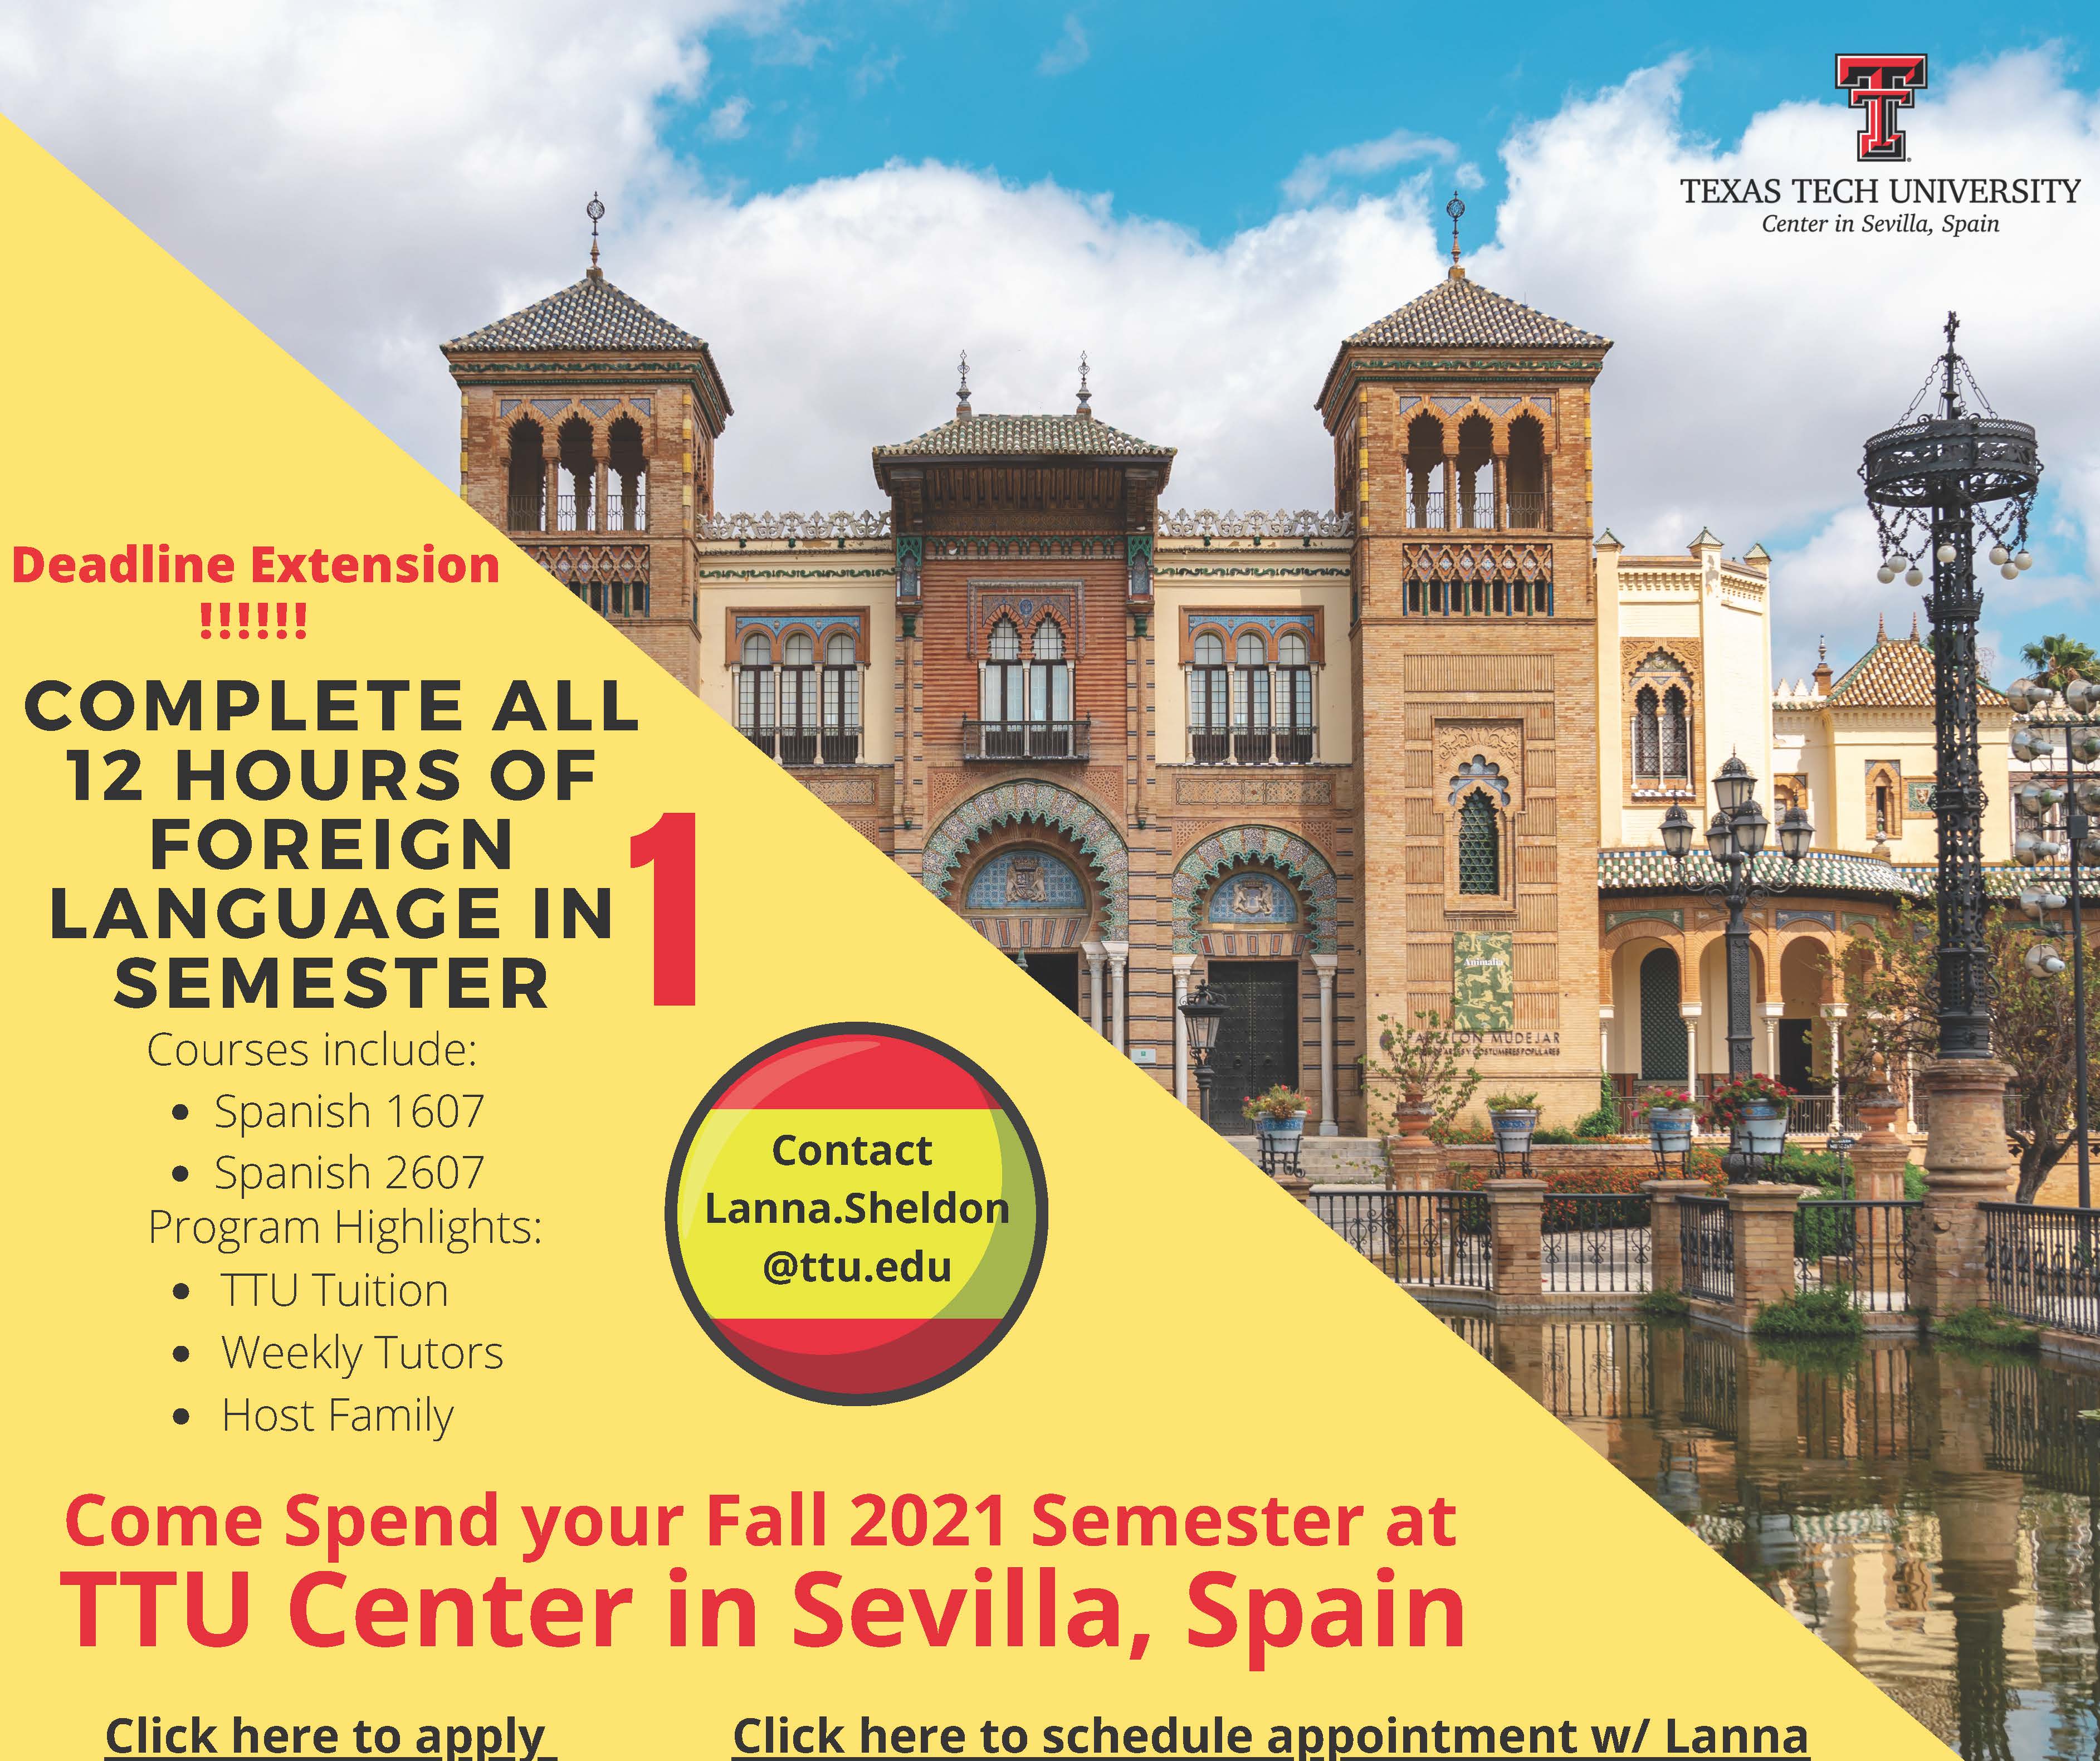 Advertisement for the fall 2021 Spanish language program at the Center in Sevilla, Spain.